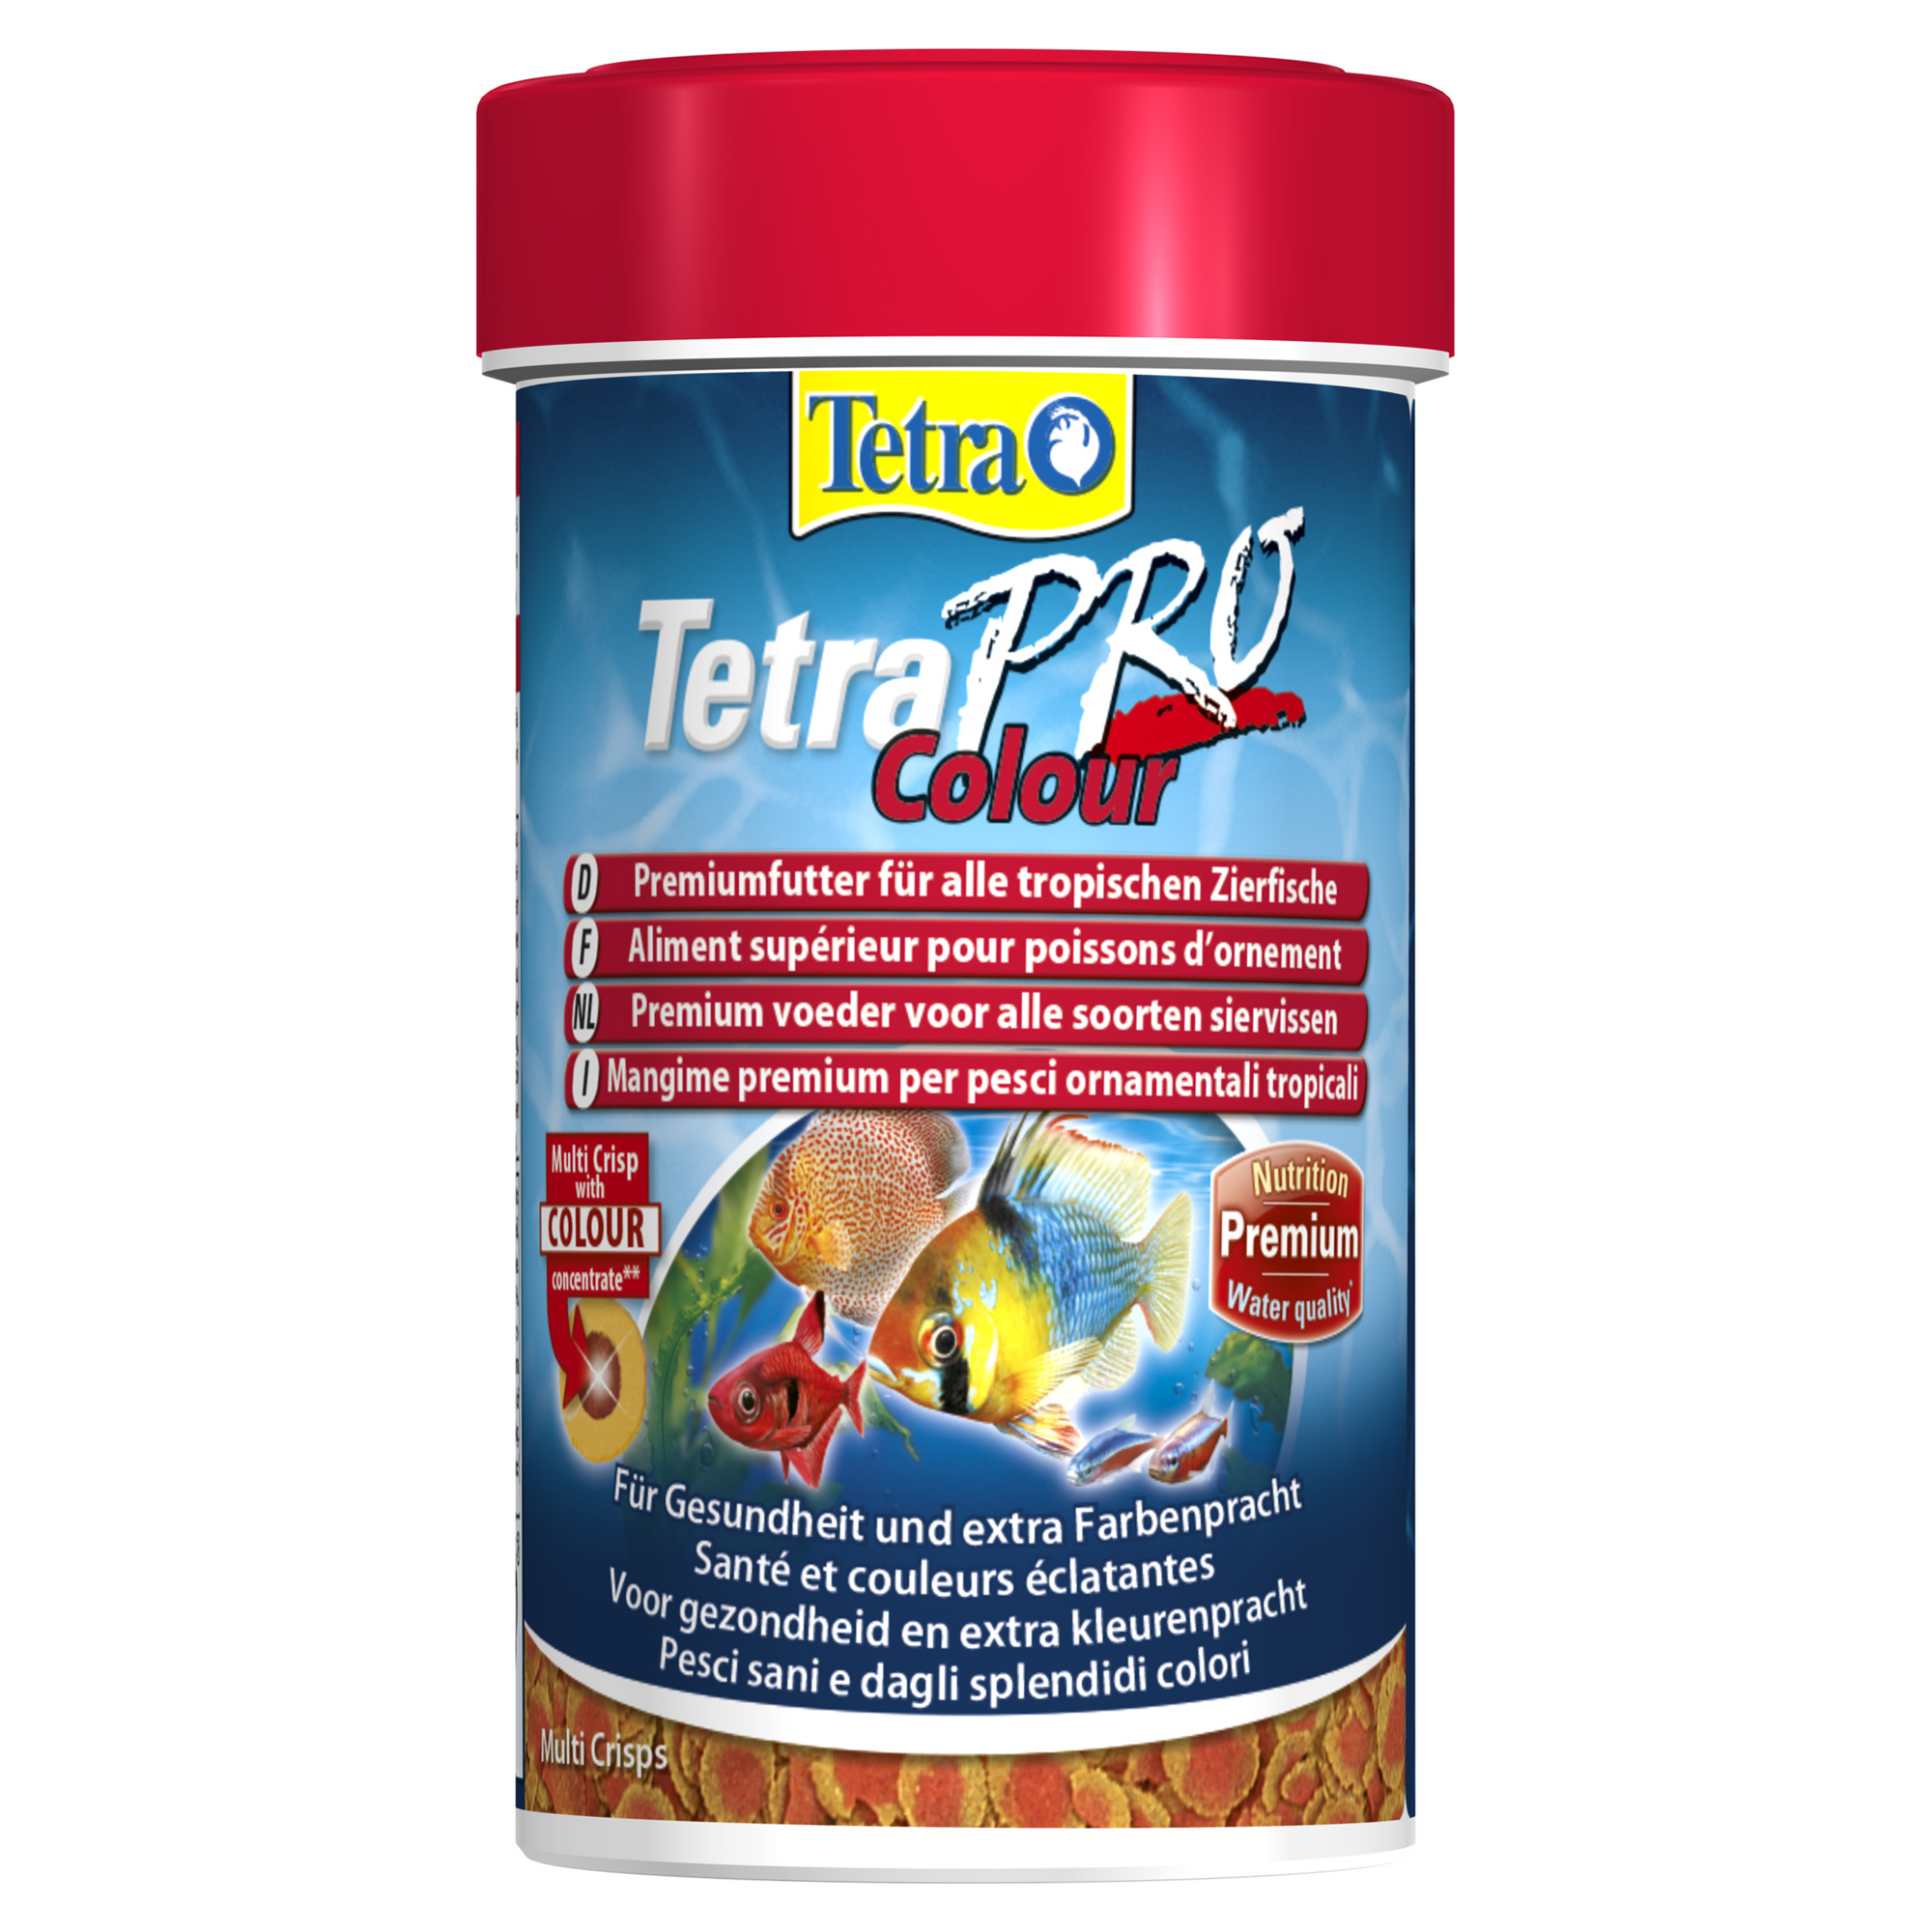 Fischfutter "Pro" Tetra Colour 20 g + product picture